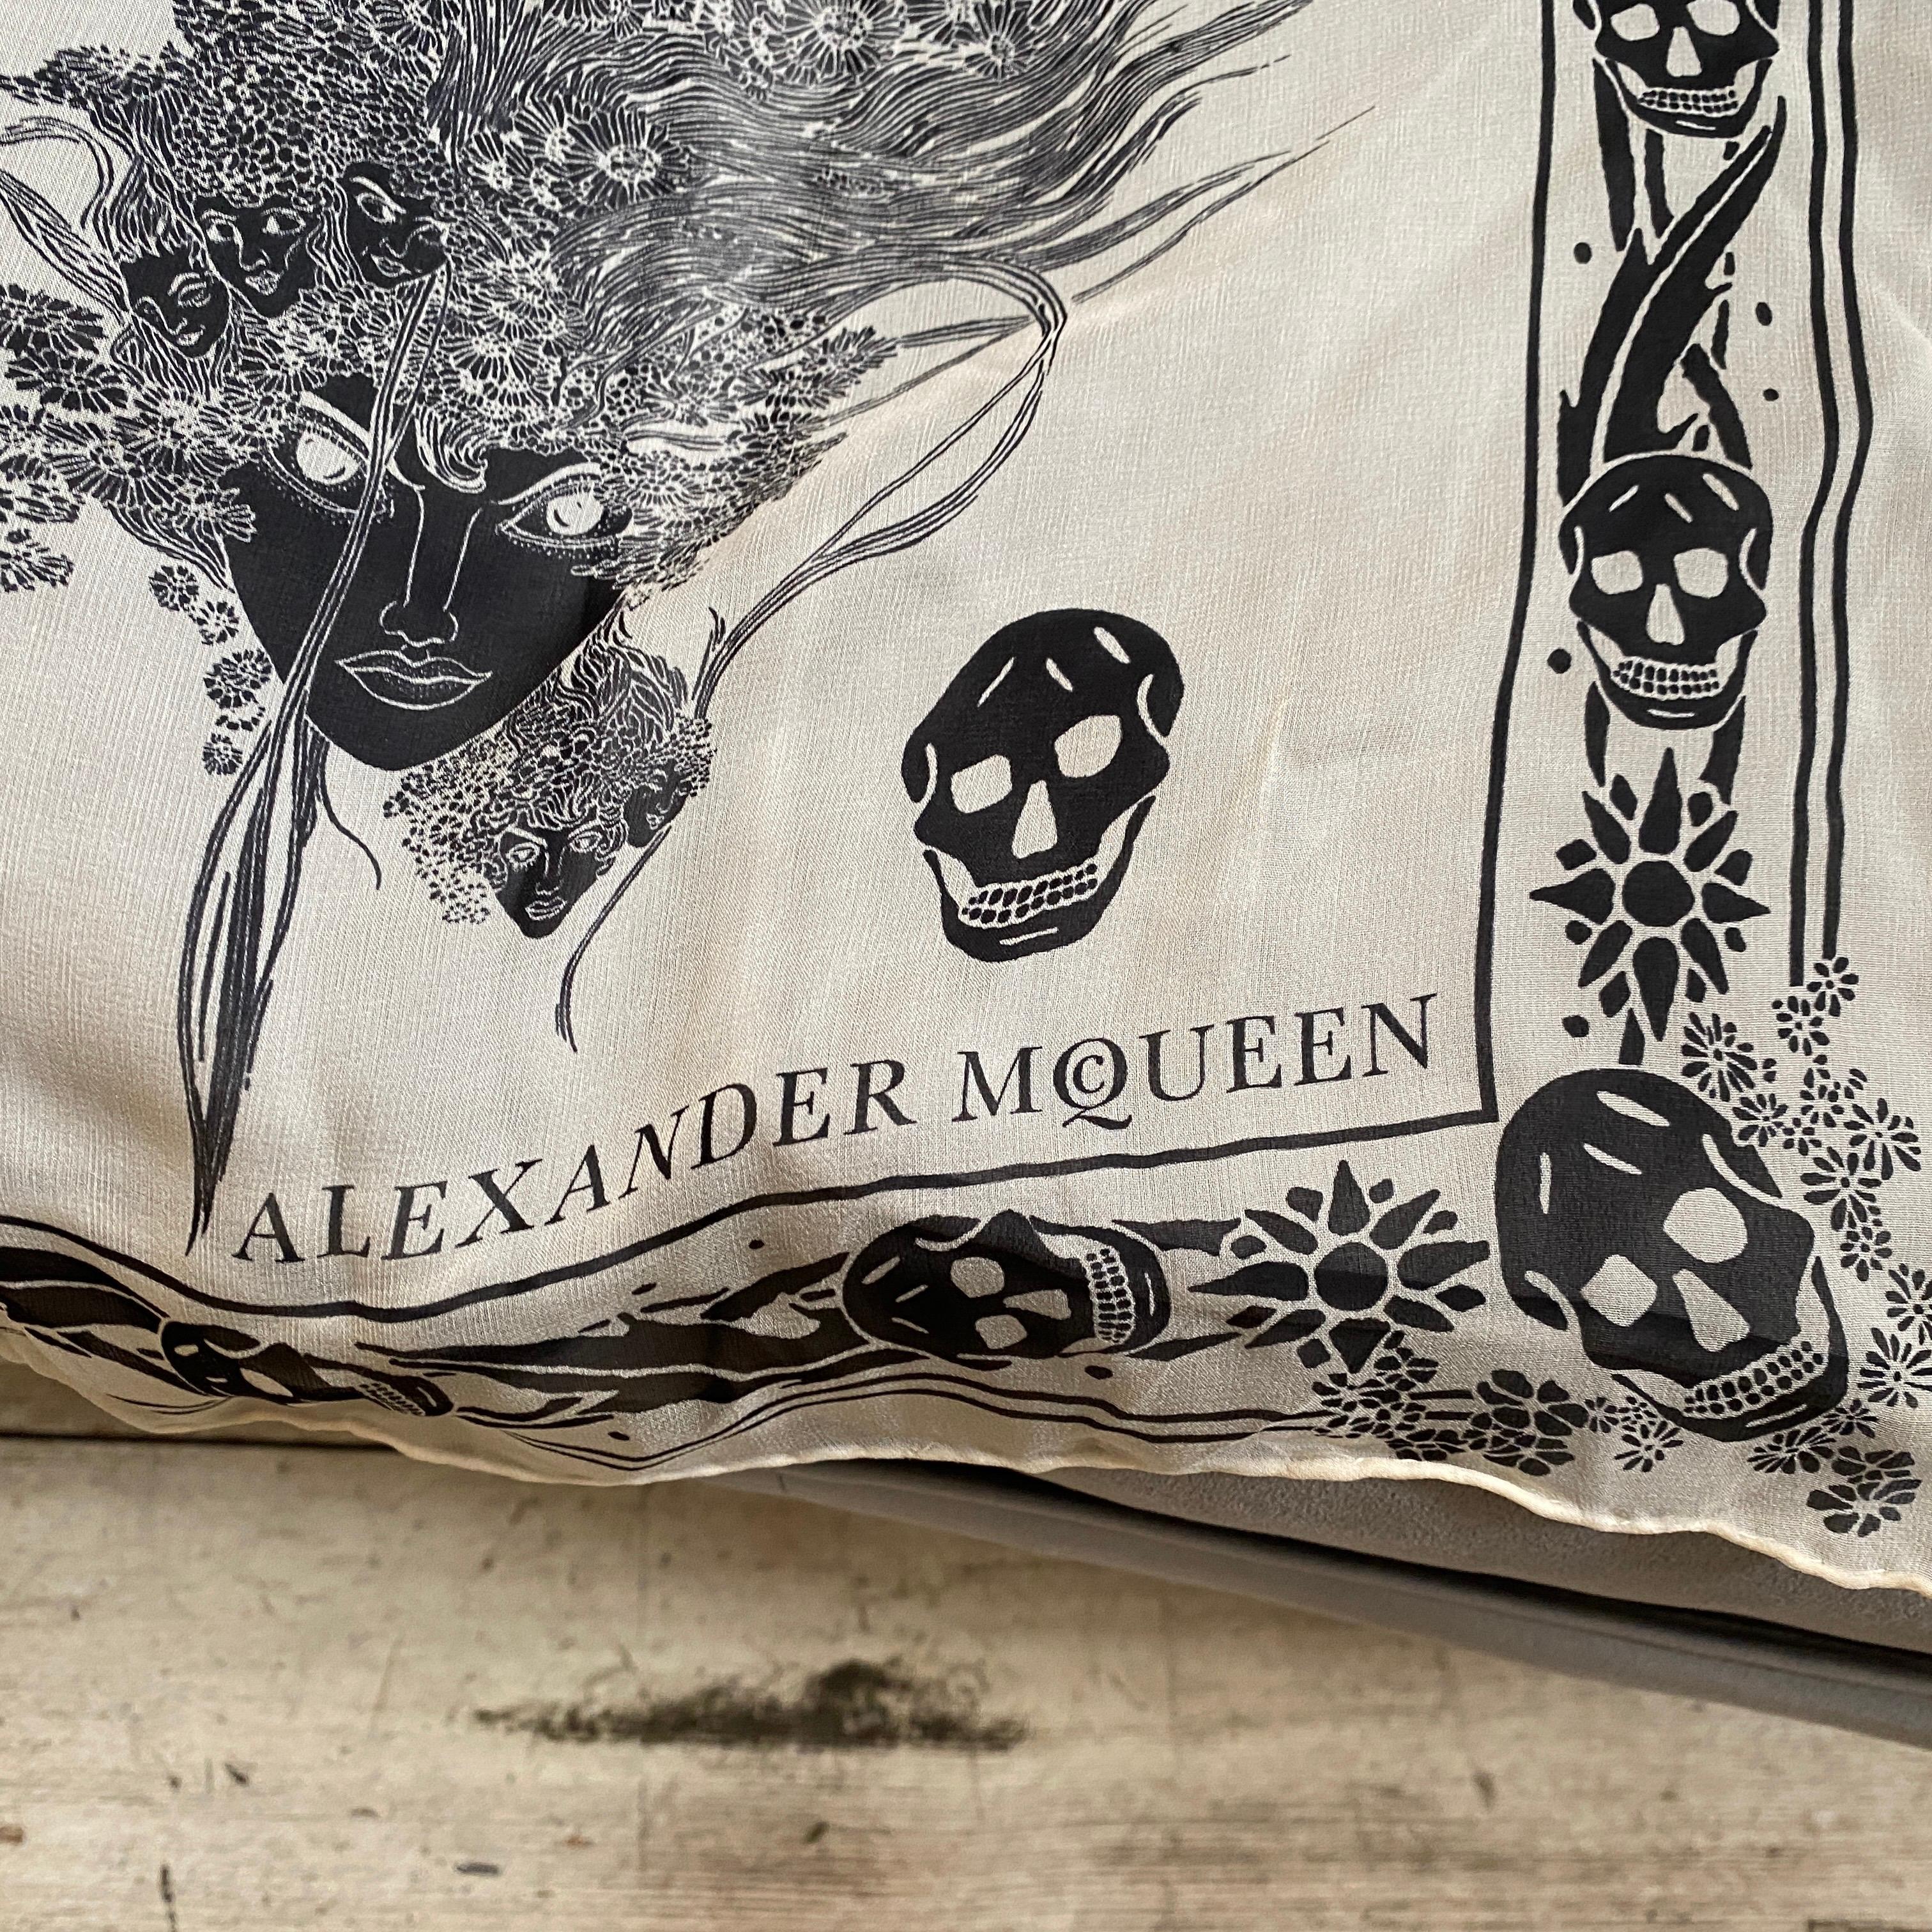 A vintage scarf made in Italy for alexander McQueen in perfect conditions: The skulls decor iTt' s a distinctive feature of the designer's creations.